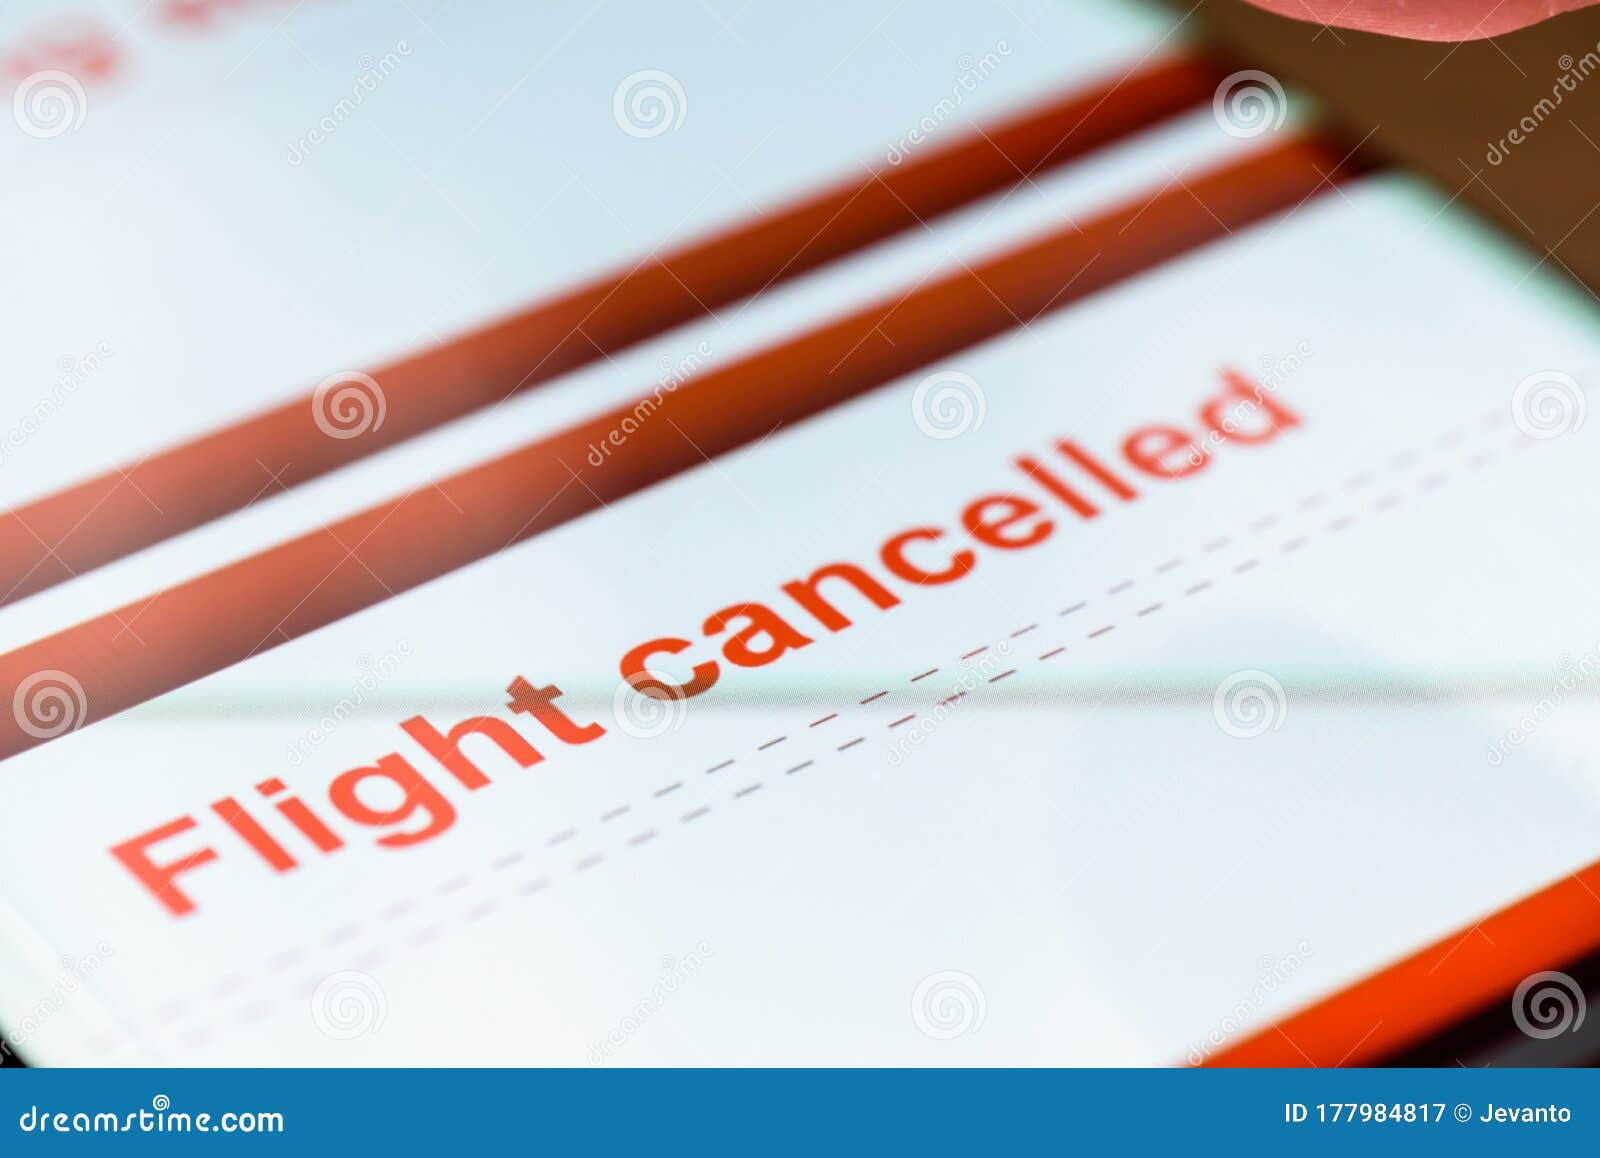 cancel ticket flight from BHM to OTH by phone